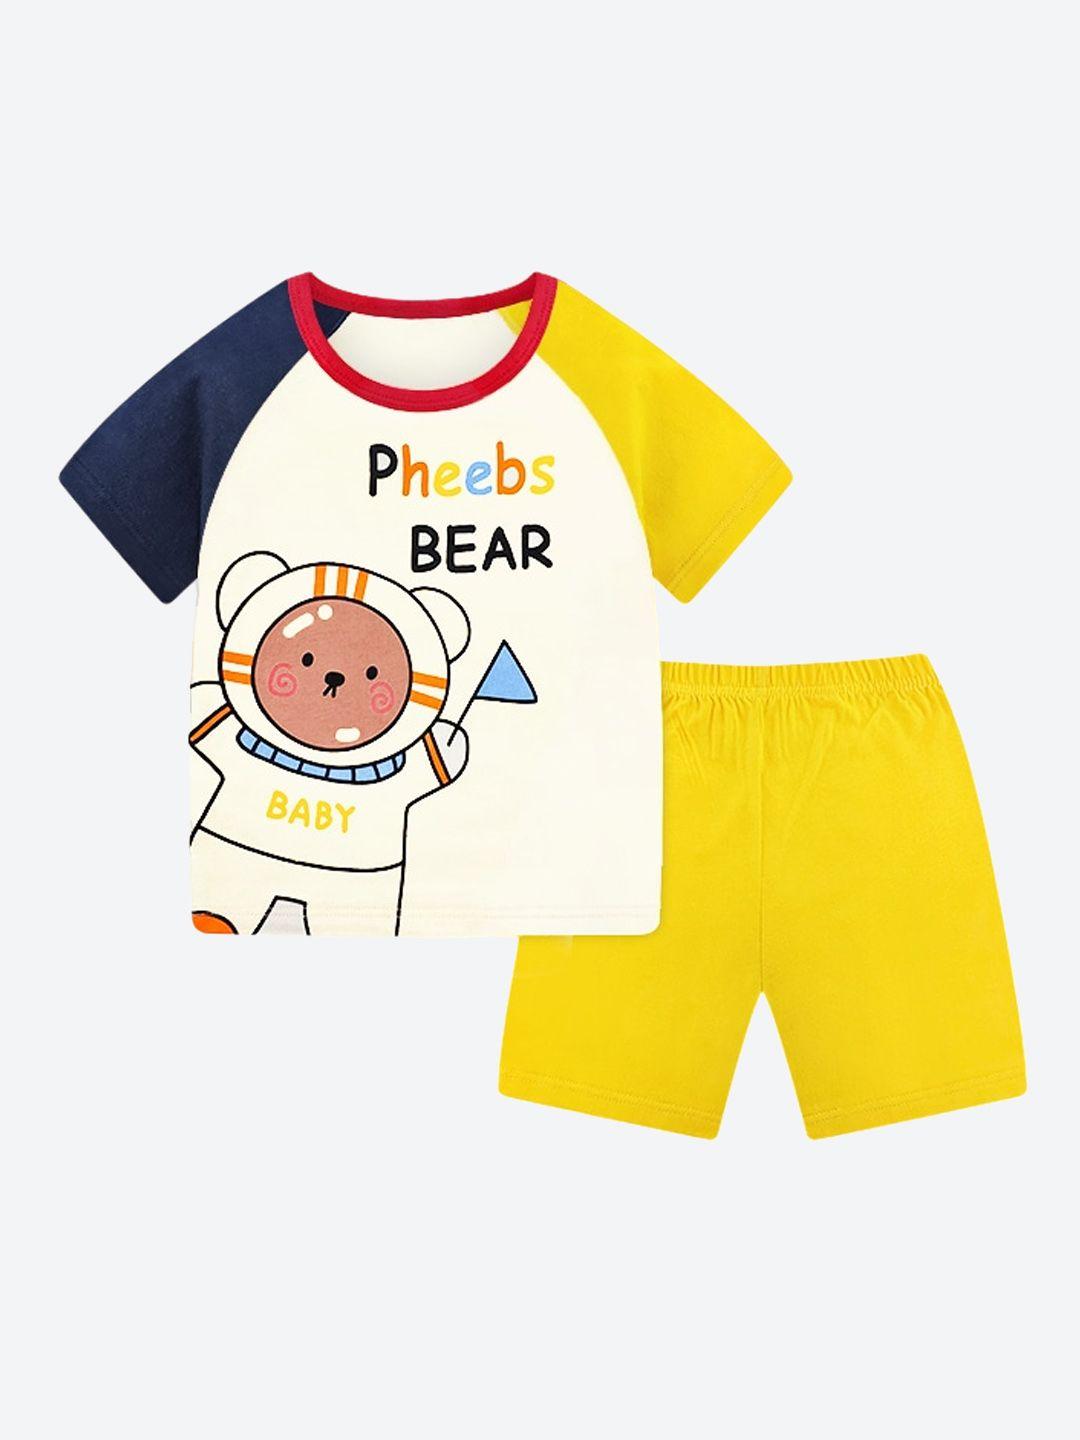 stylecast boys printed cotton t-shirt and shorts